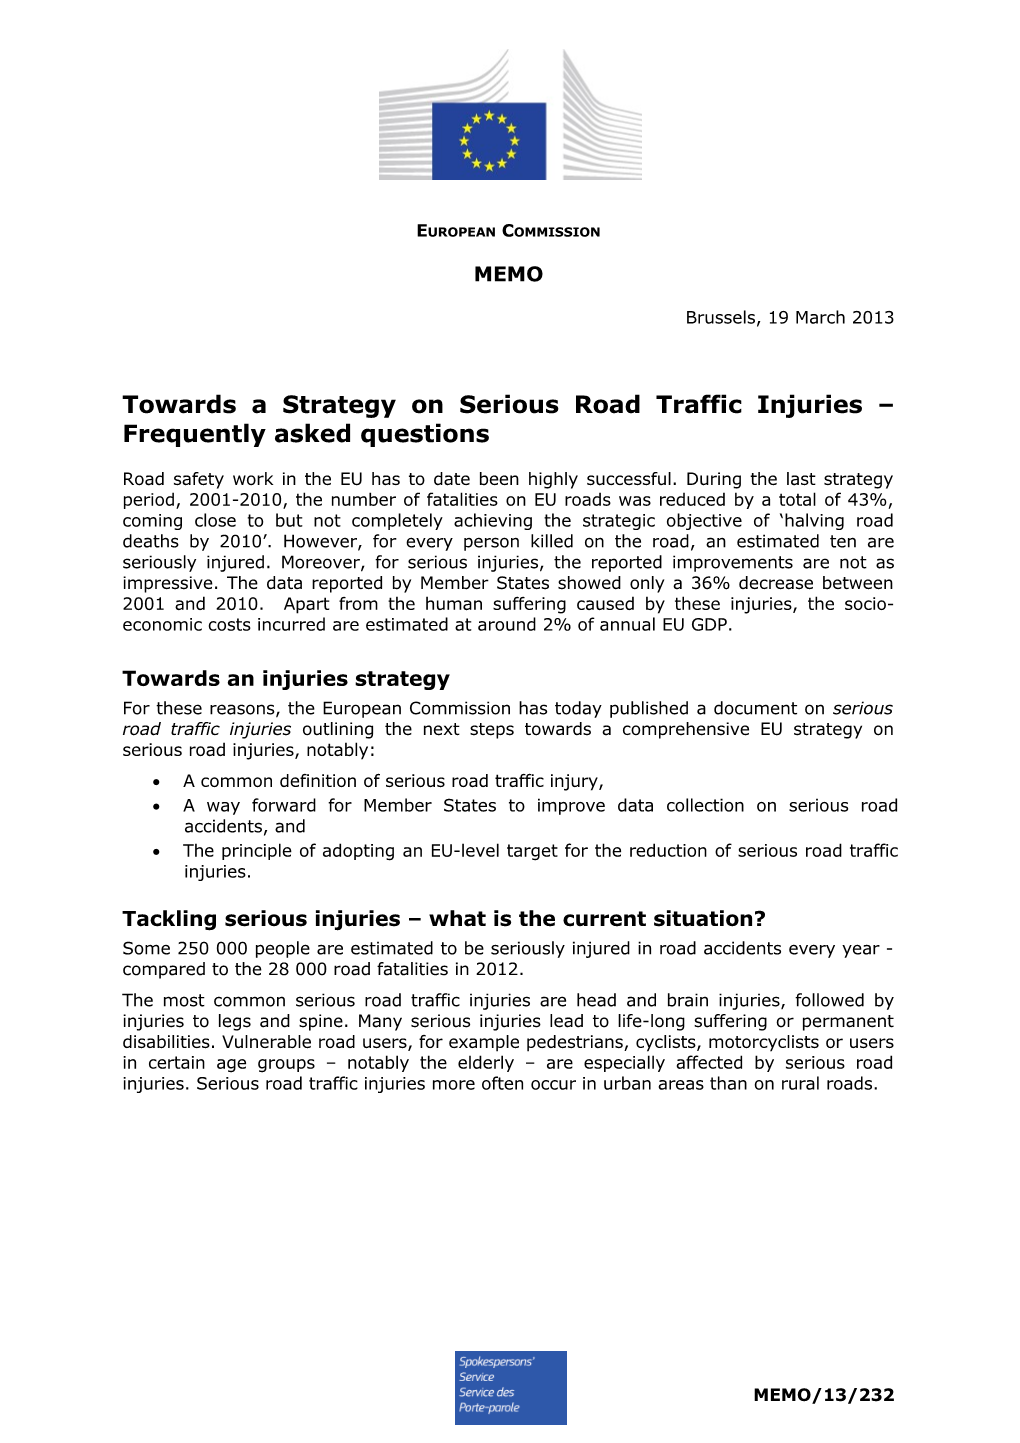 Towards a Strategy on Serious Road Traffic Injuries Frequently Asked Questions